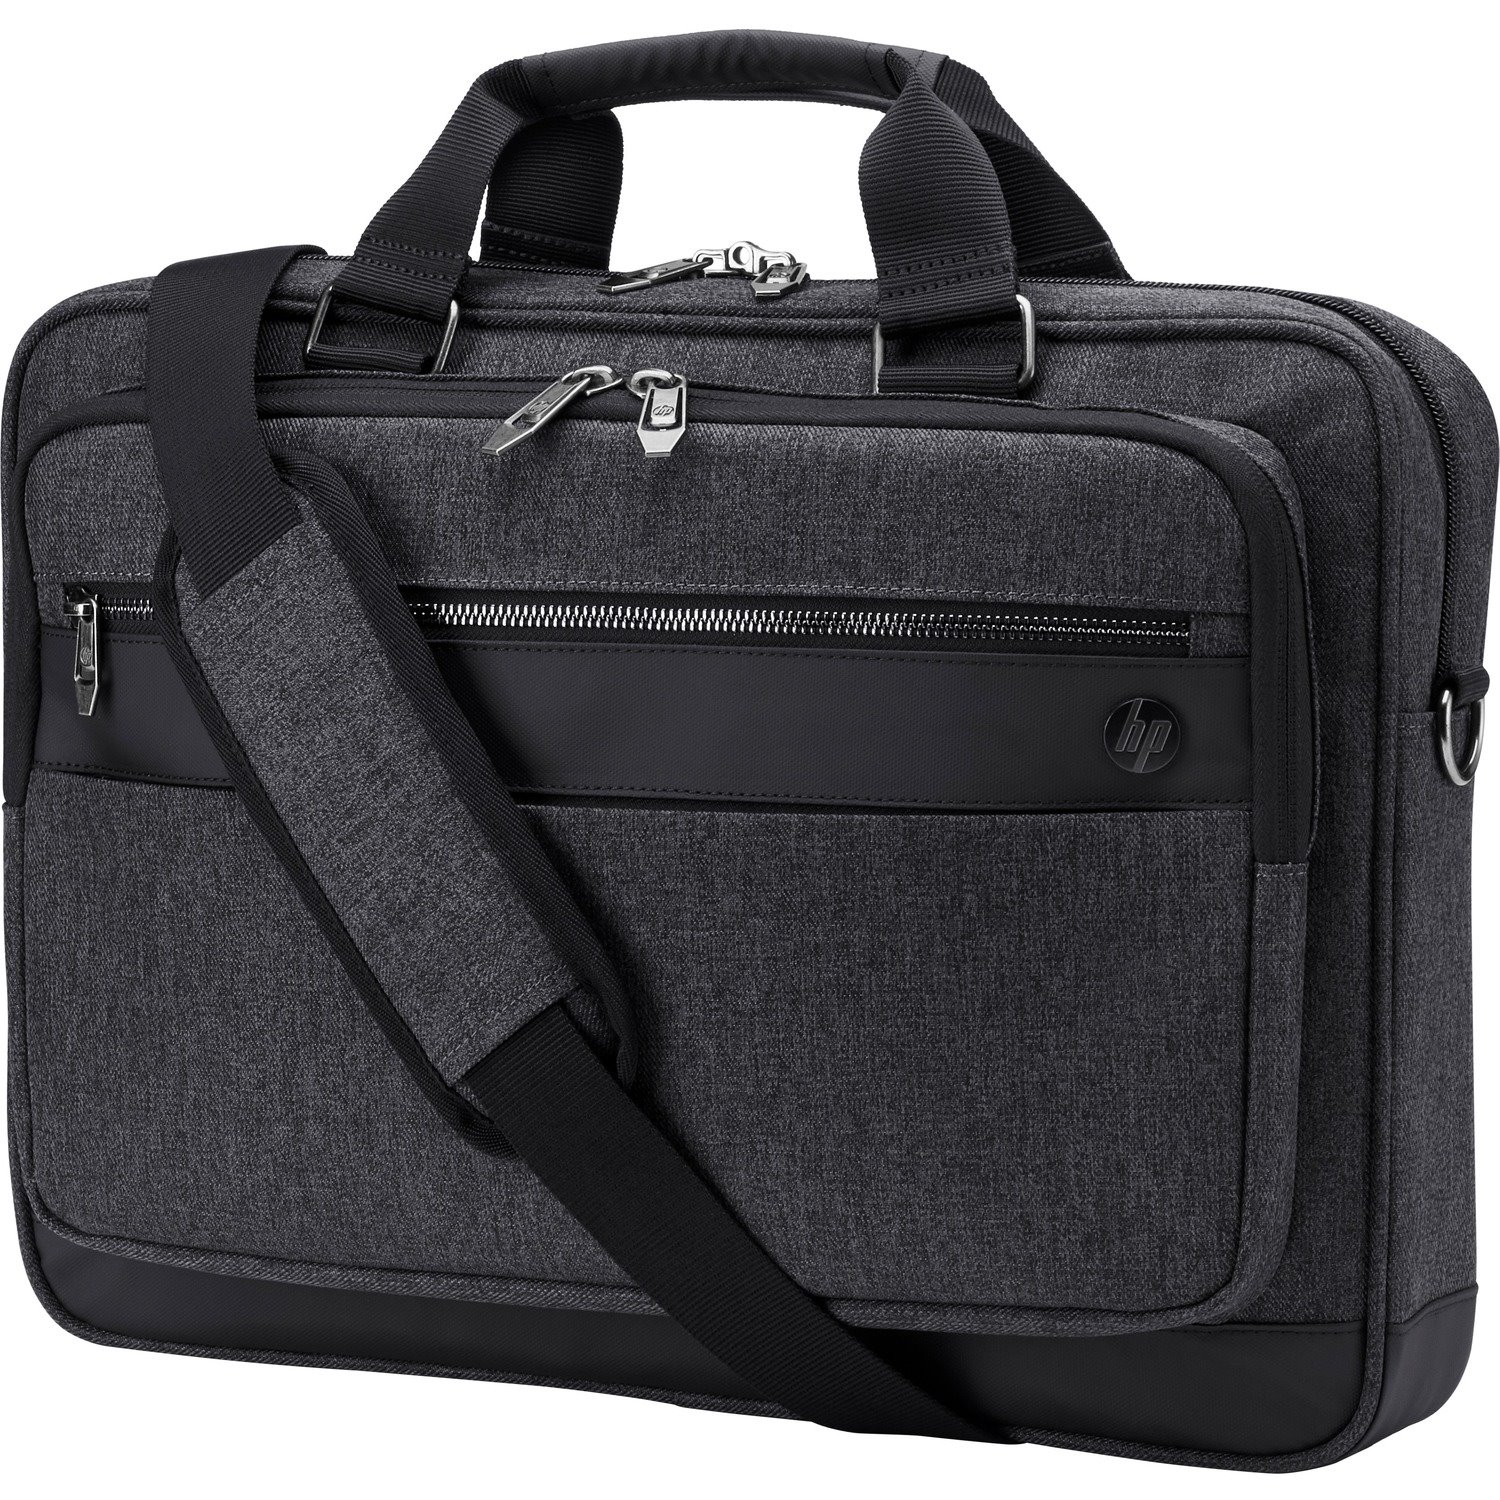 HP Executive Carrying Case for 15.6" Notebook